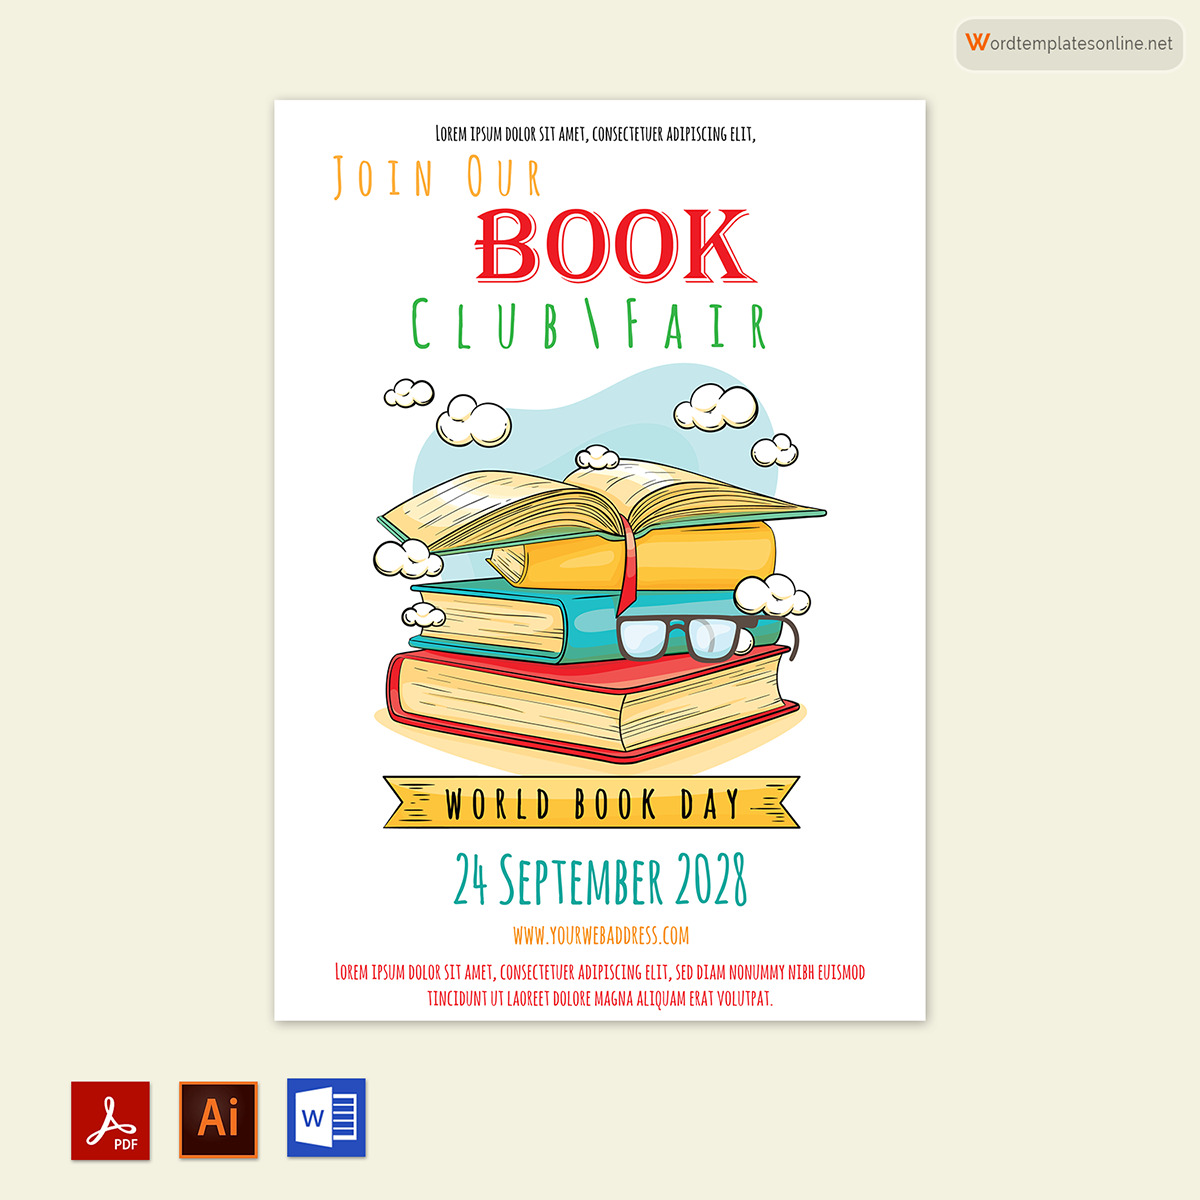 Download Book Club Flyer Templates - Free Word, PSD, AI Sample